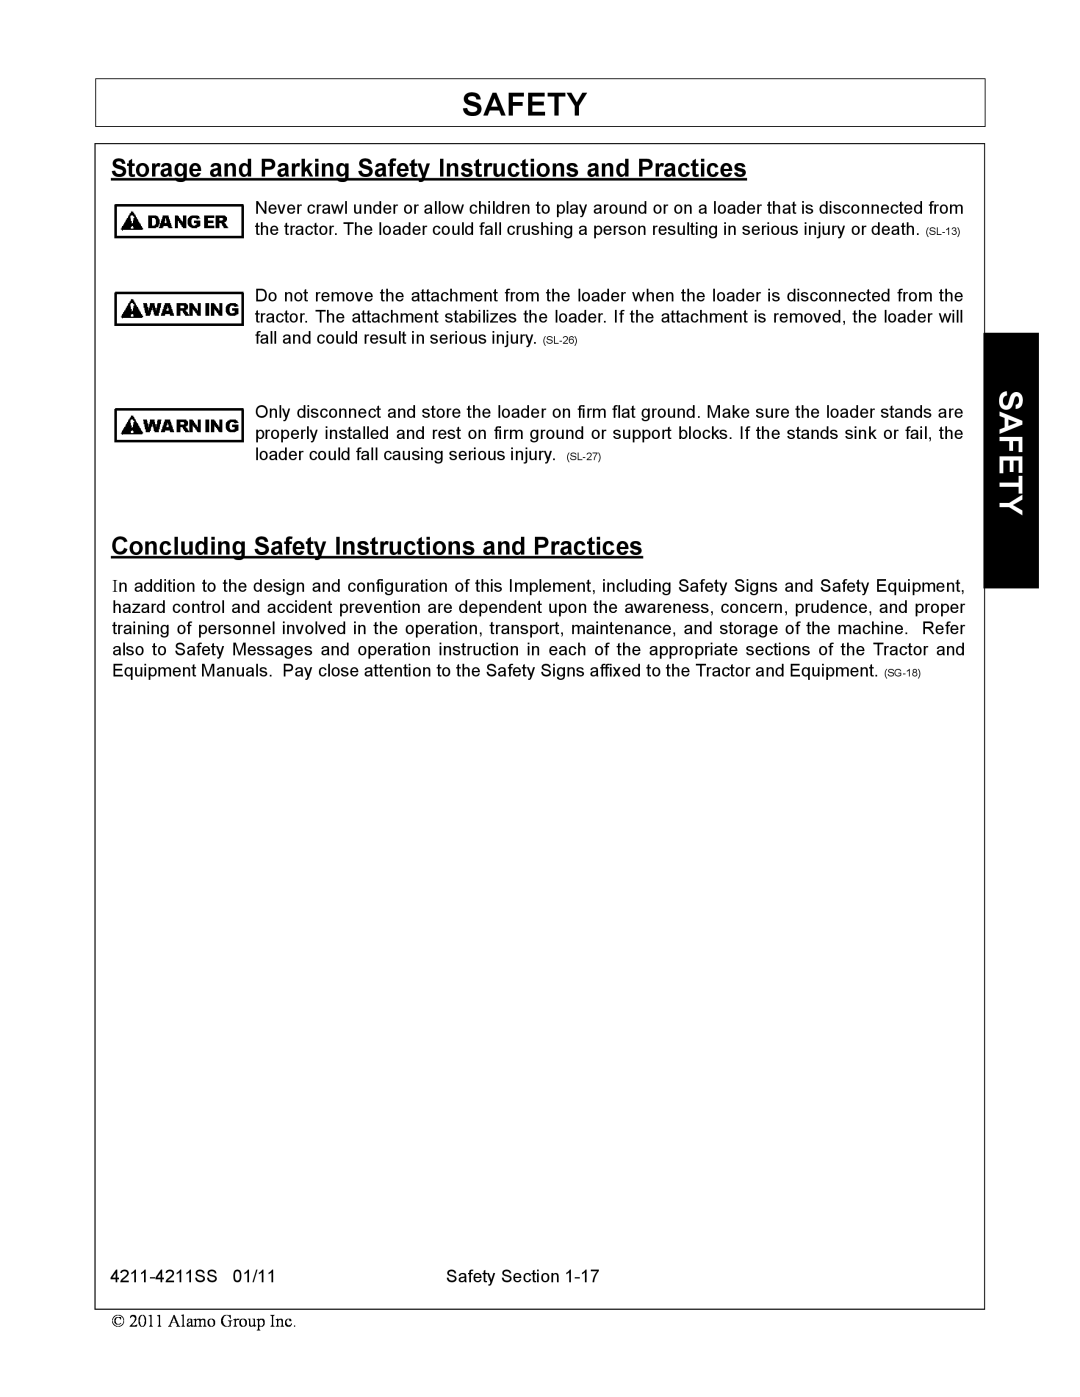 Servis-Rhino 4211 Storage and Parking Safety Instructions and Practices, Concluding Safety Instructions and Practices 